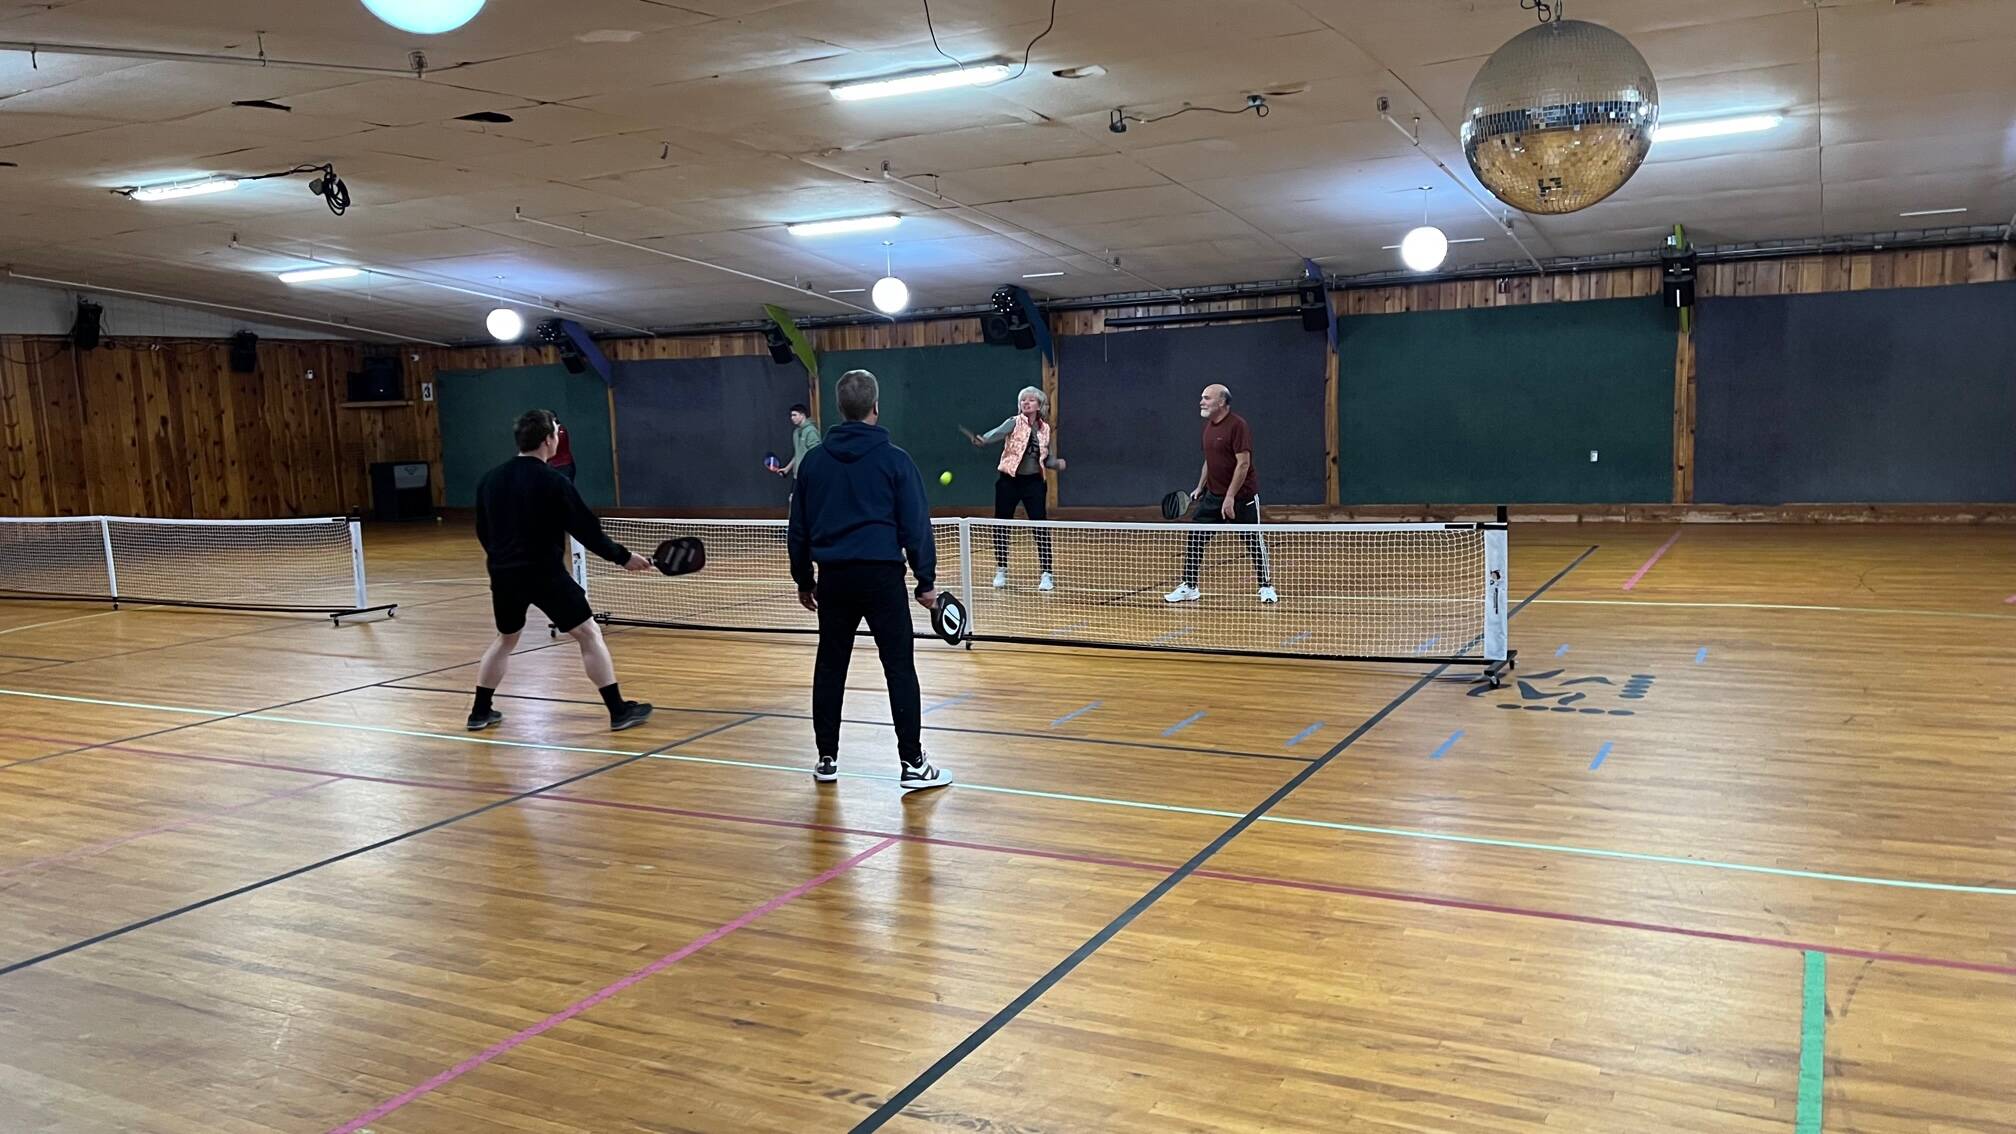 Photo provided
Indoor pickleball courts recently opened at the Roller Barn in Oak Harbor.